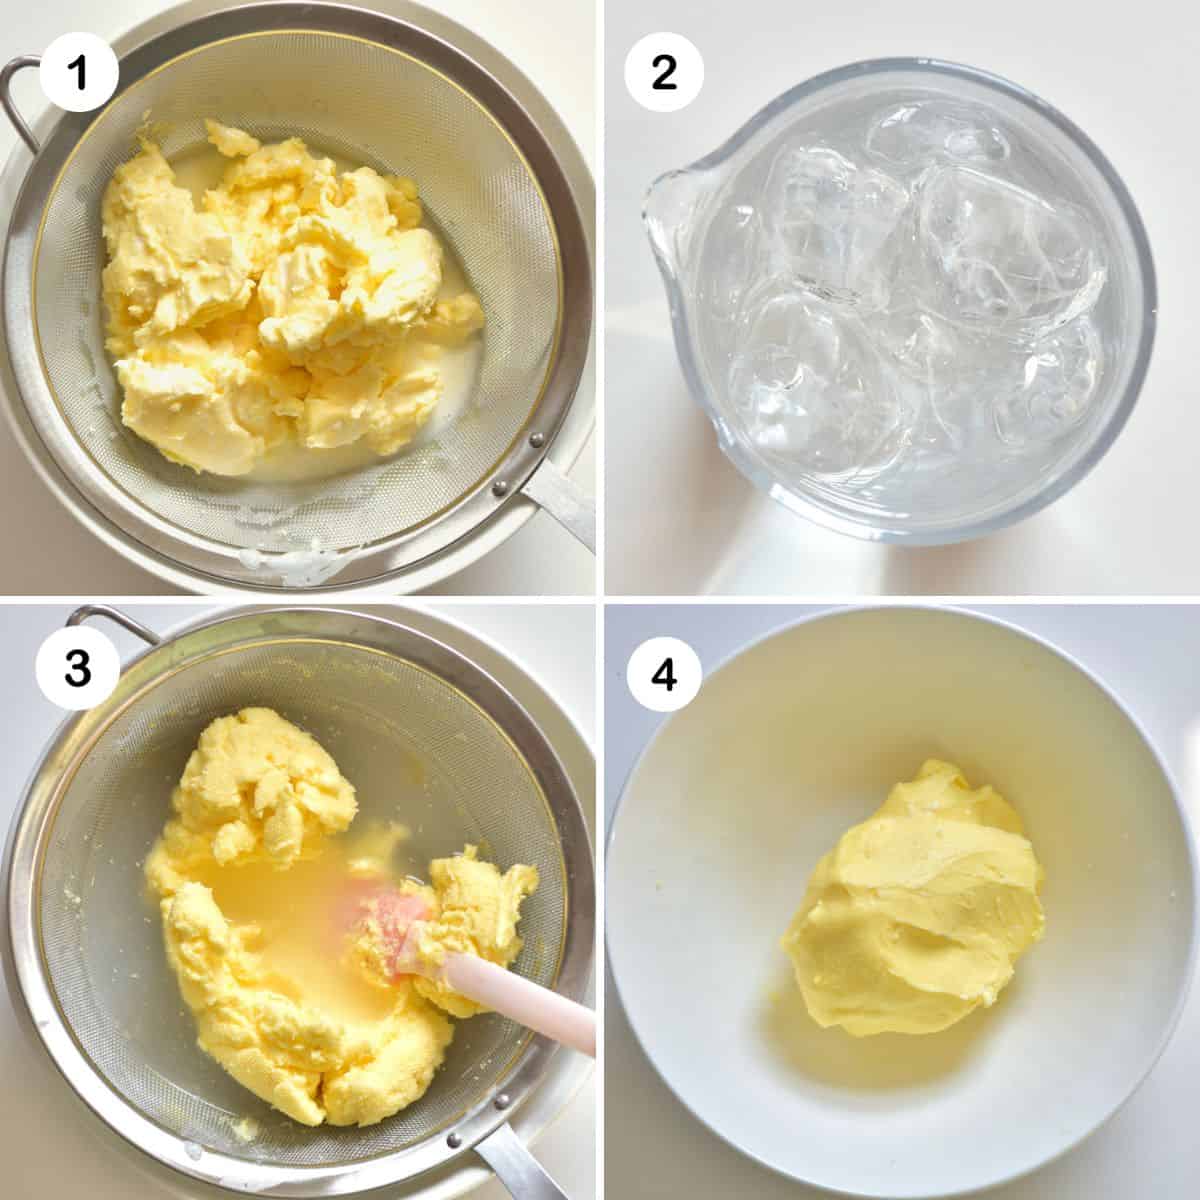 Steps for removing buttermilk from homemade butter